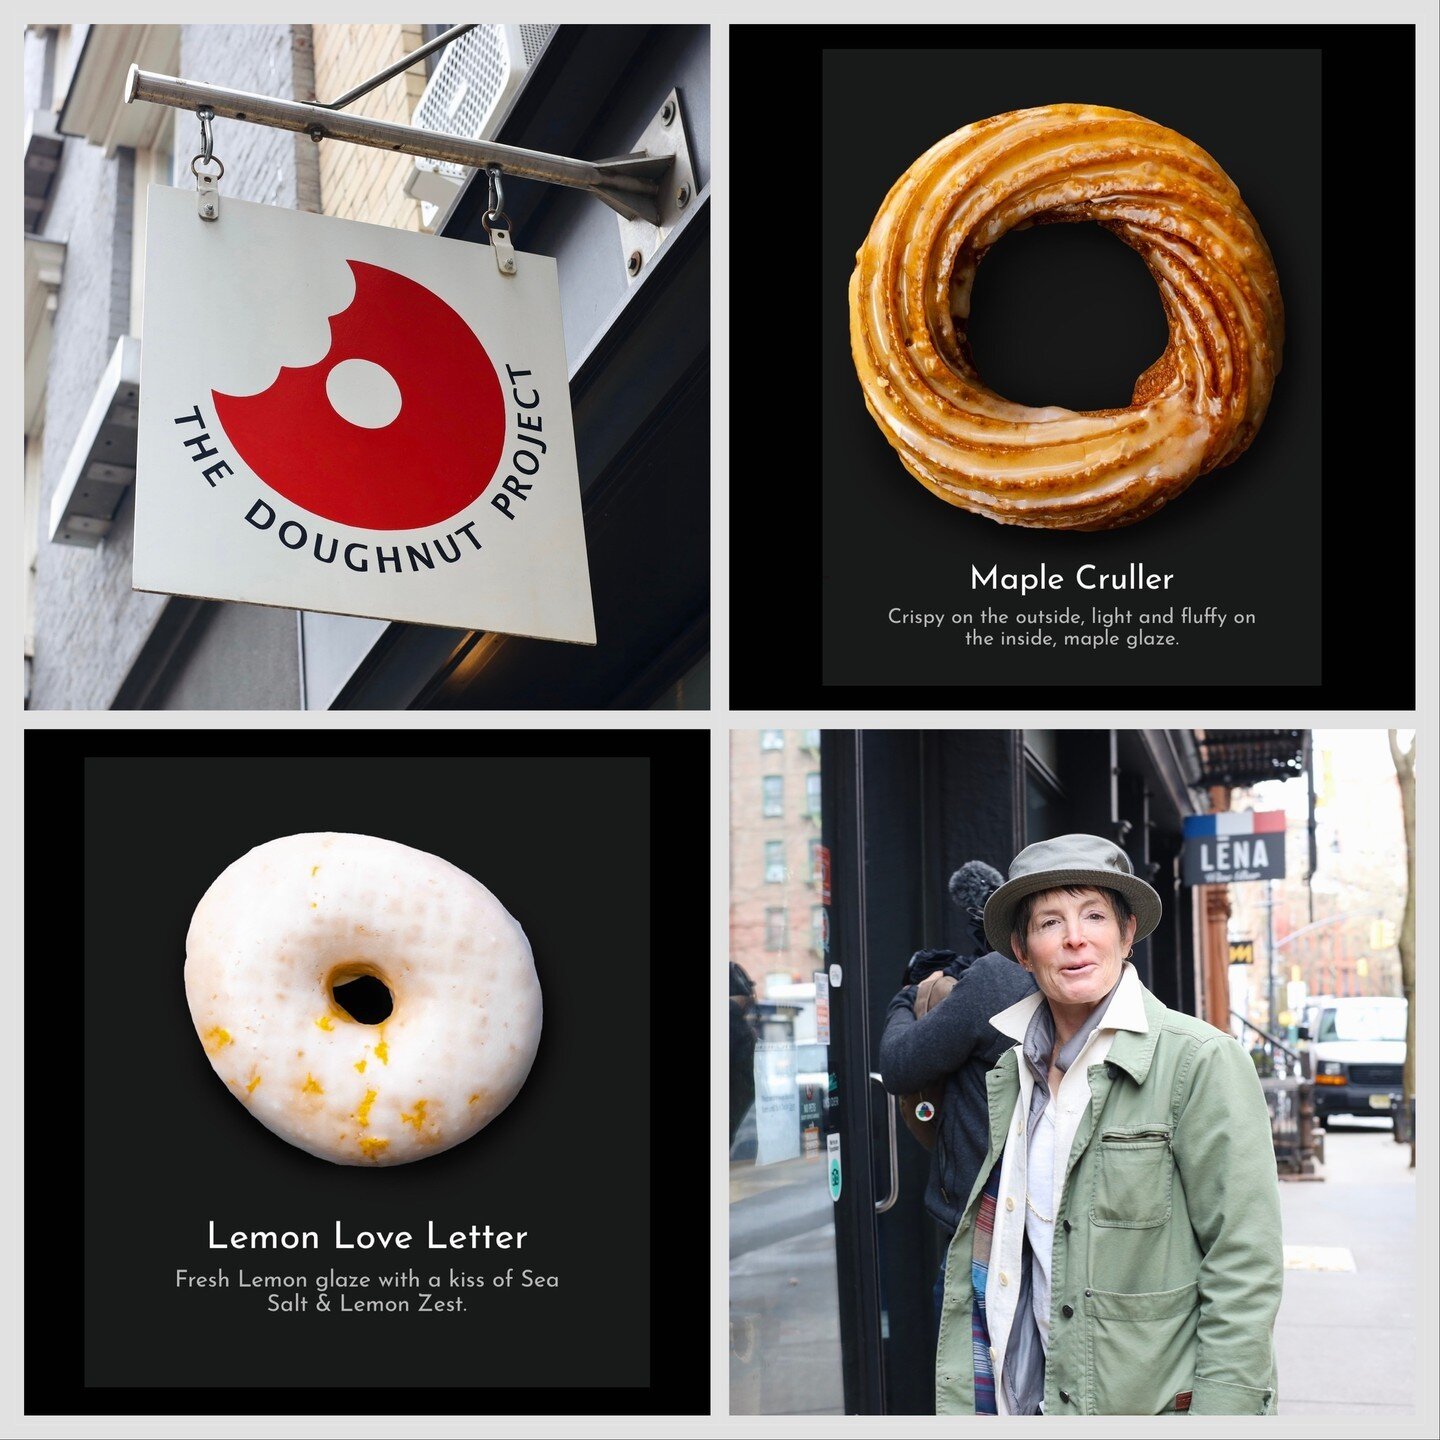 The Doughnut Project. This place is the BOMB! Maybe someday we can do a collaboration. 🤔 🍩 (I like The  Cruller!)⁠
⁠
From our &quot;West Village Walkabout!&quot; episode - direct link in bio.⁠
⁠
Photos by @reggiebets⁠ and @thedoughnutproject⁠